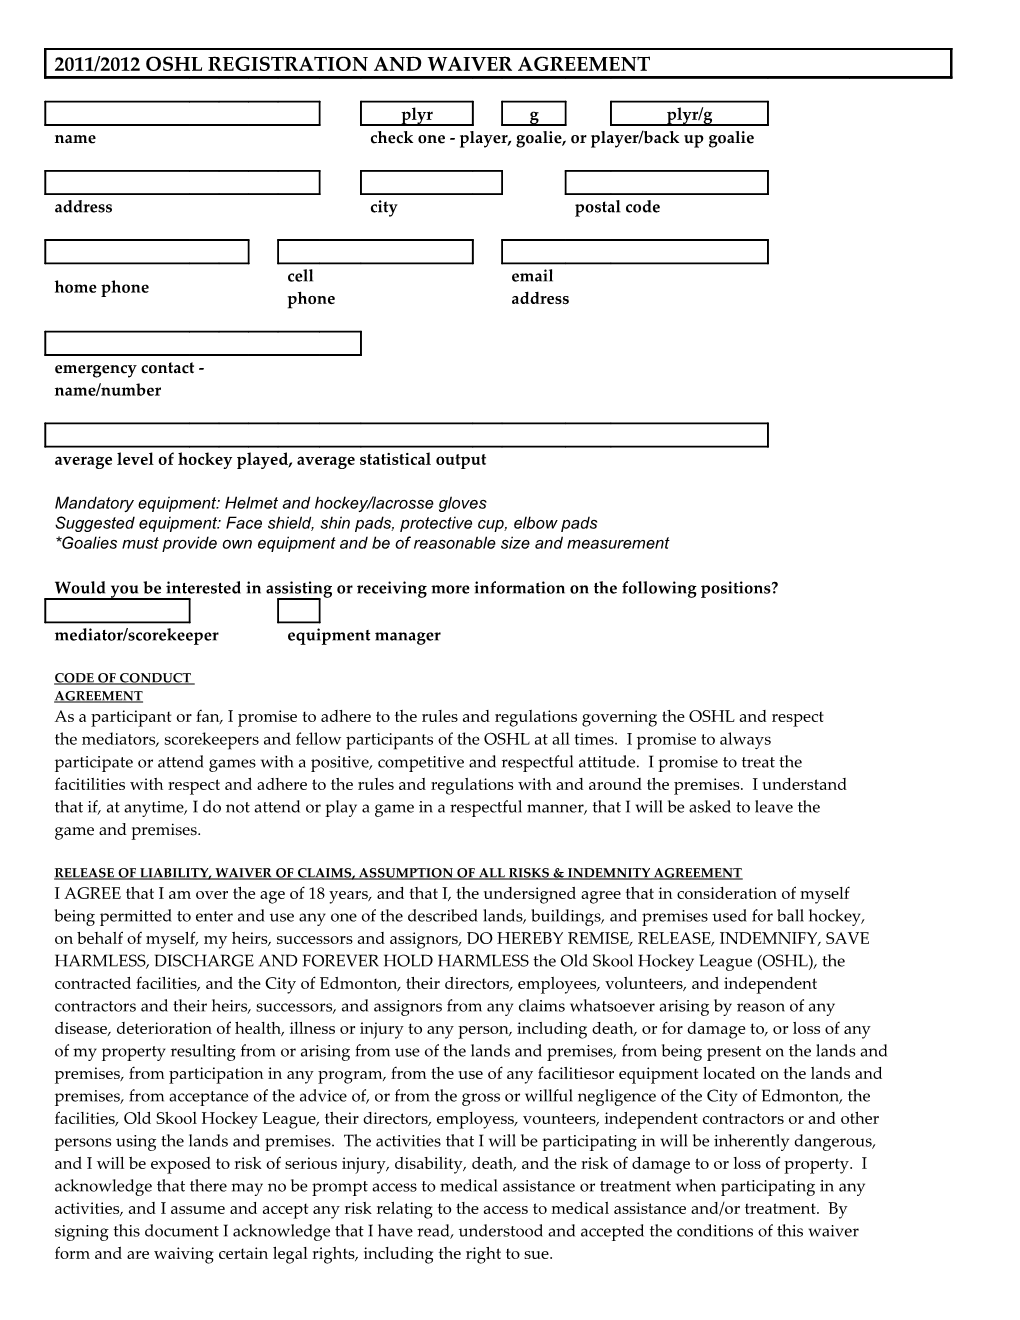 2011/2012 Oshl Registration and Waiver Agreement